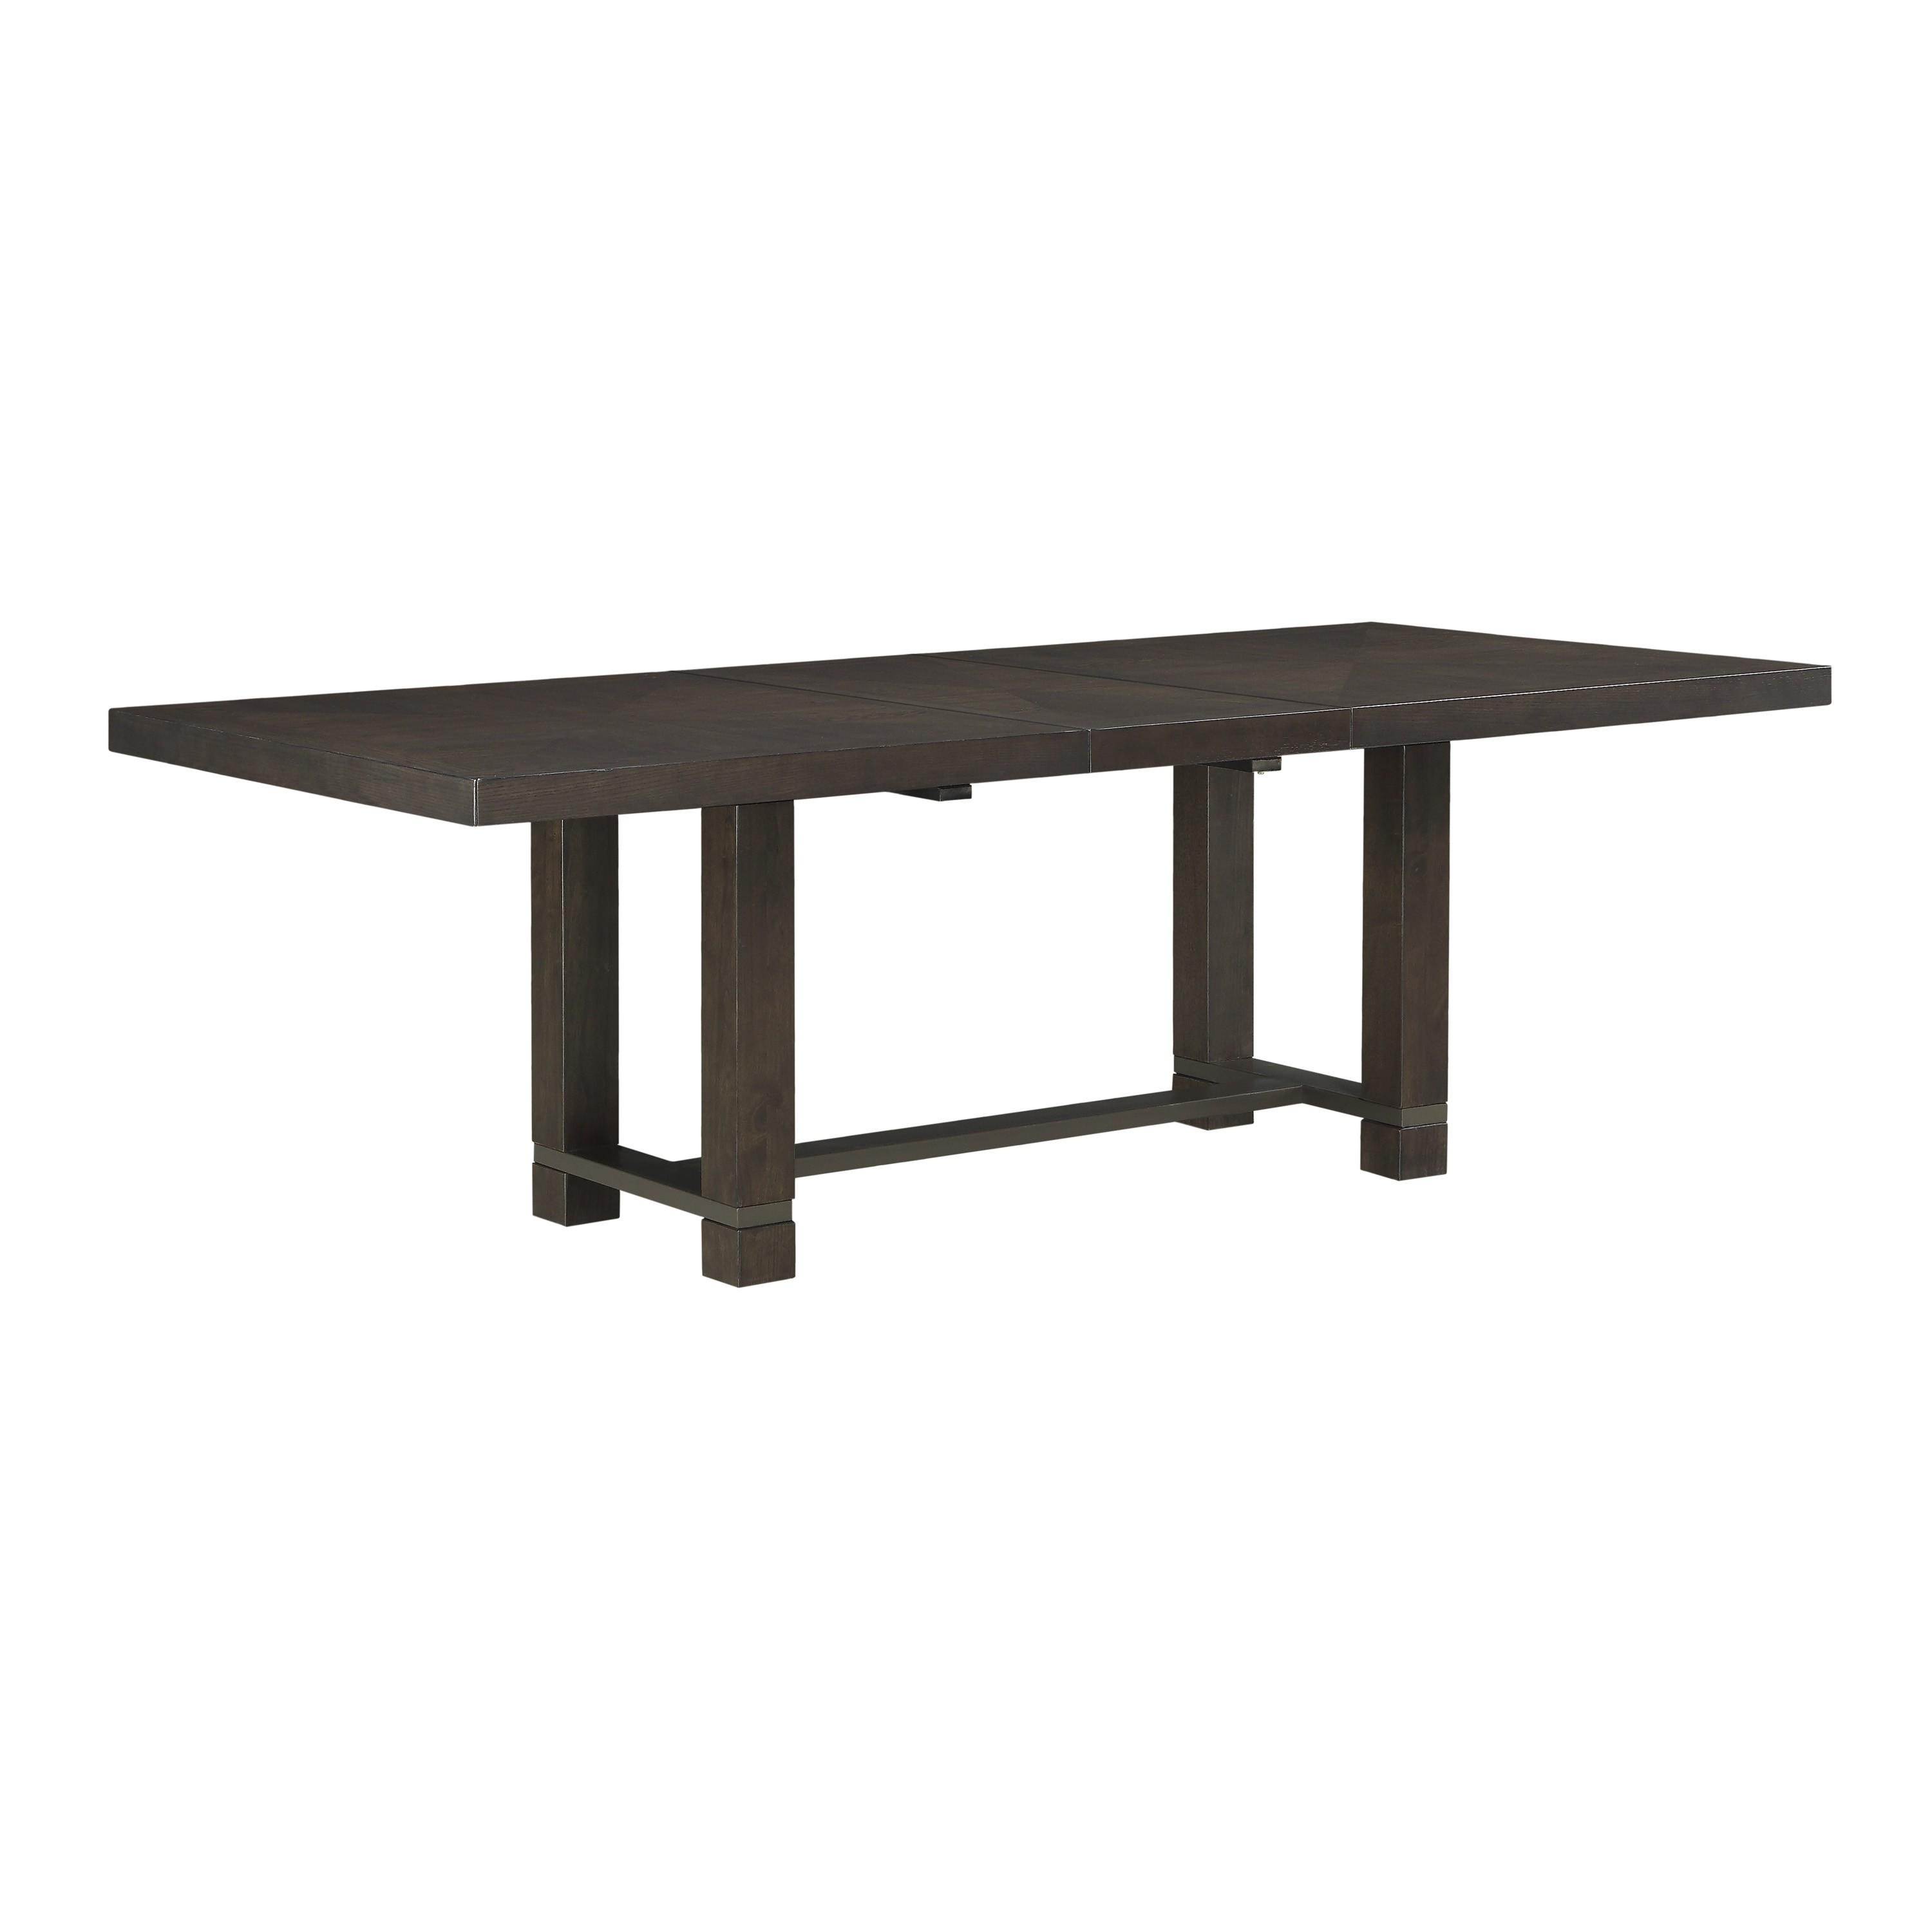 Transitional Dining Table 5654-92 Rathdrum 5654-92 in Dark Oak 